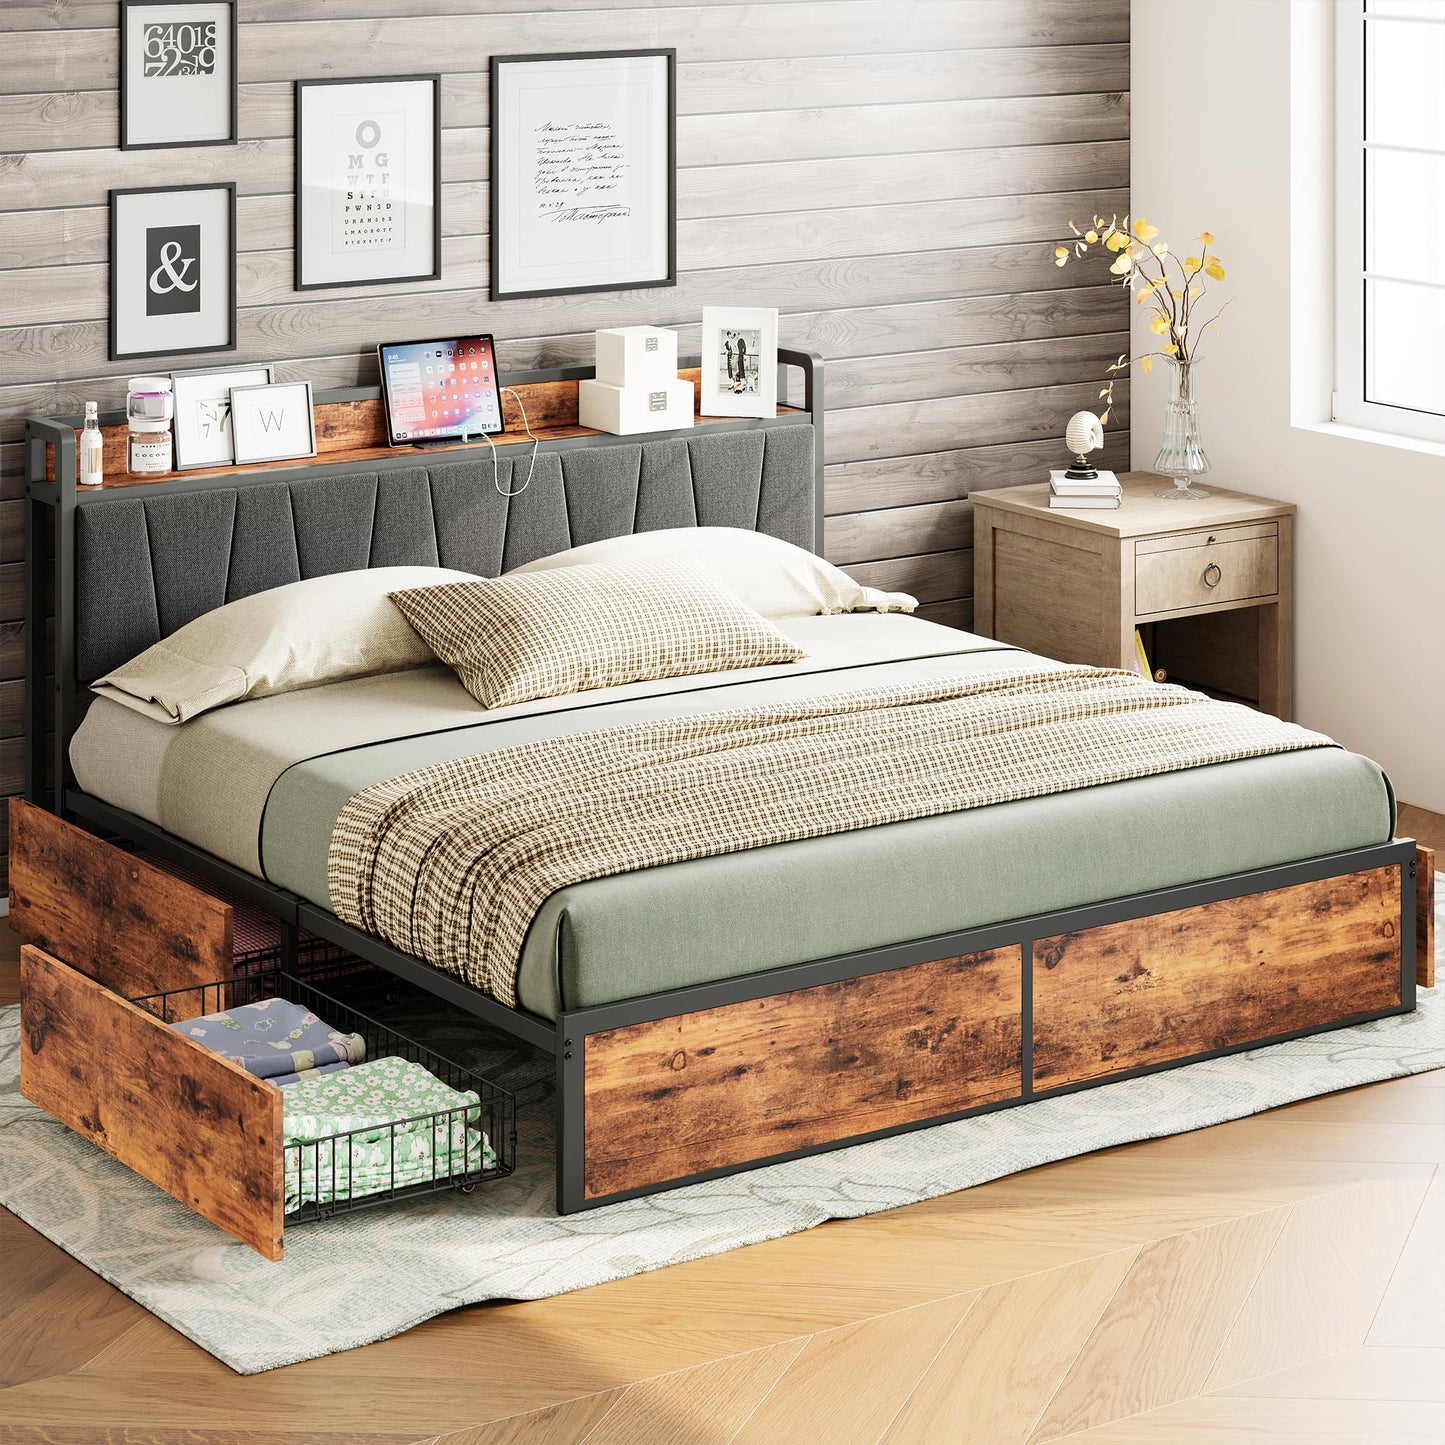 LIKIMIO King Bed Frame with 4 Storage Drawers, Platform Bed with Charged Headboard, Sturdy and Stable, No Noise, No Box Spring Needed, Easy to Install